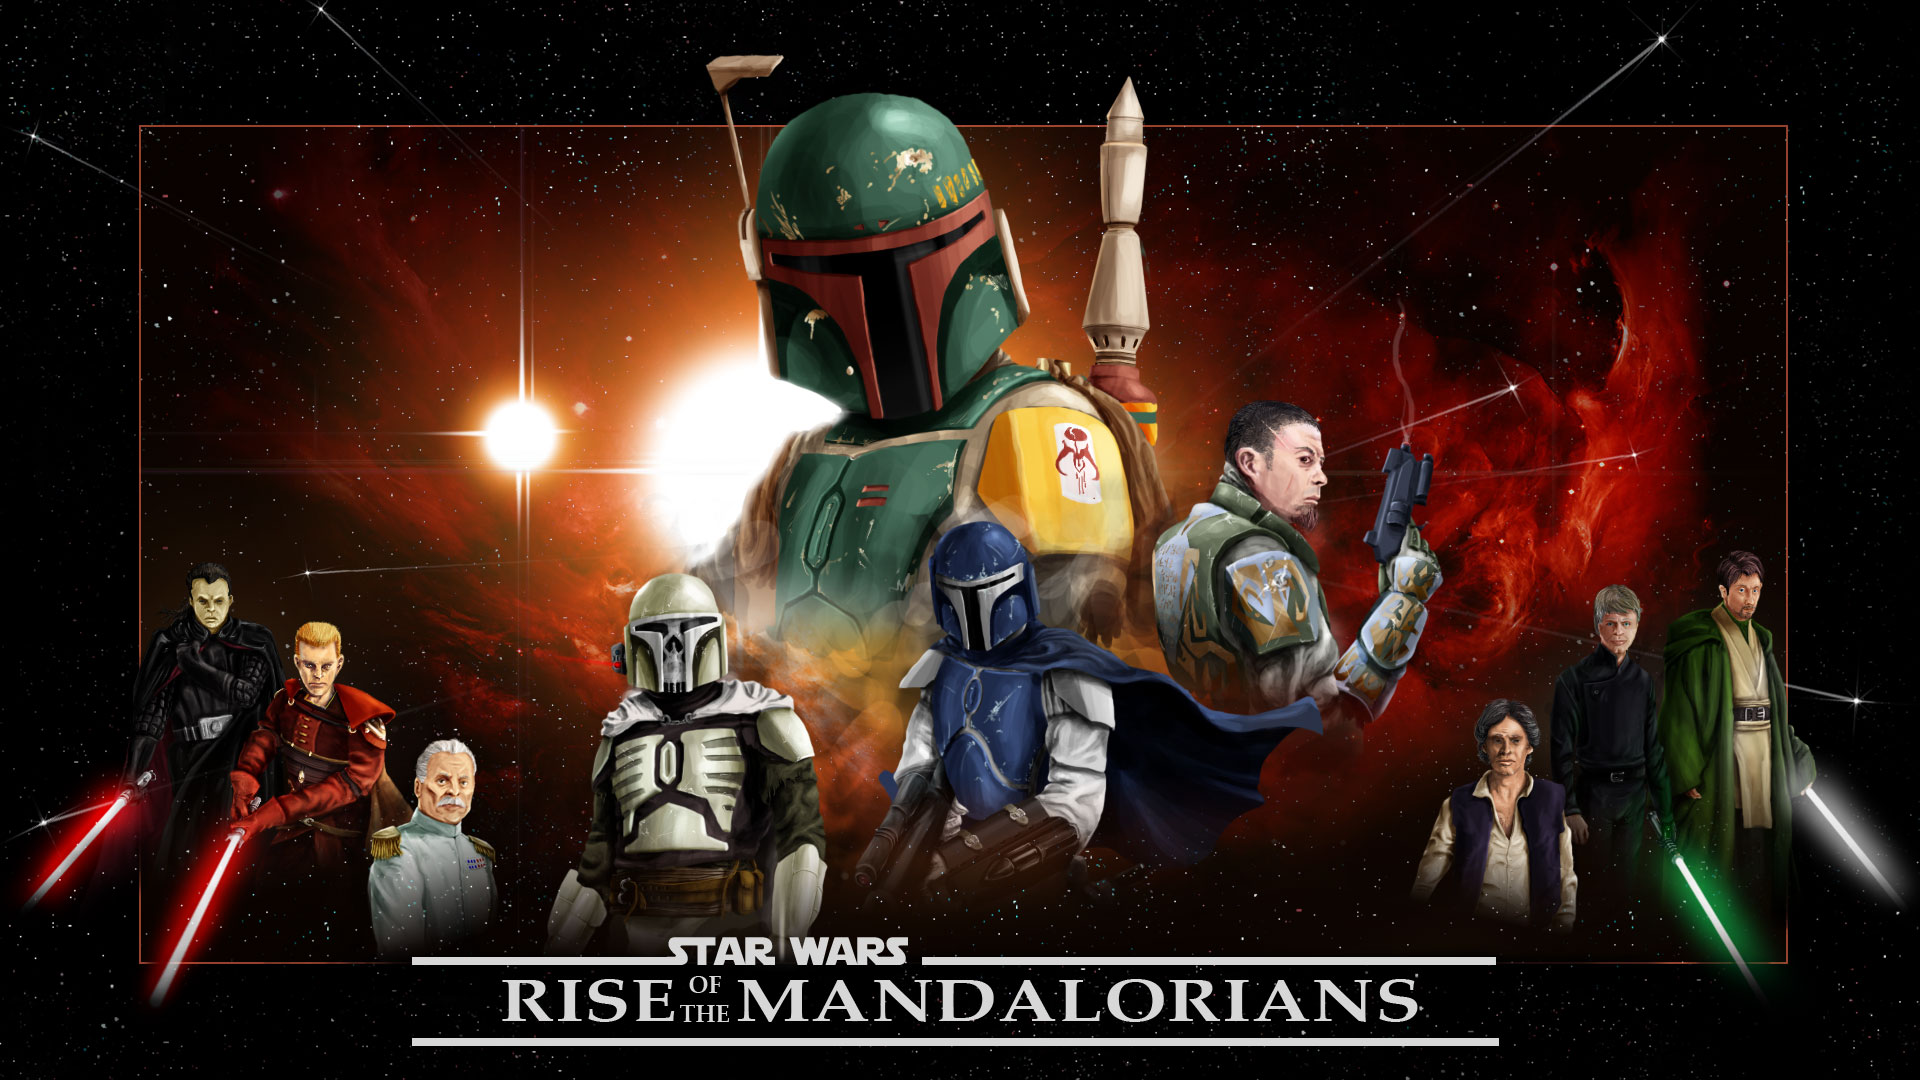 Mandalorians Mod For Star Wars Empire At War Forces Of Corruption